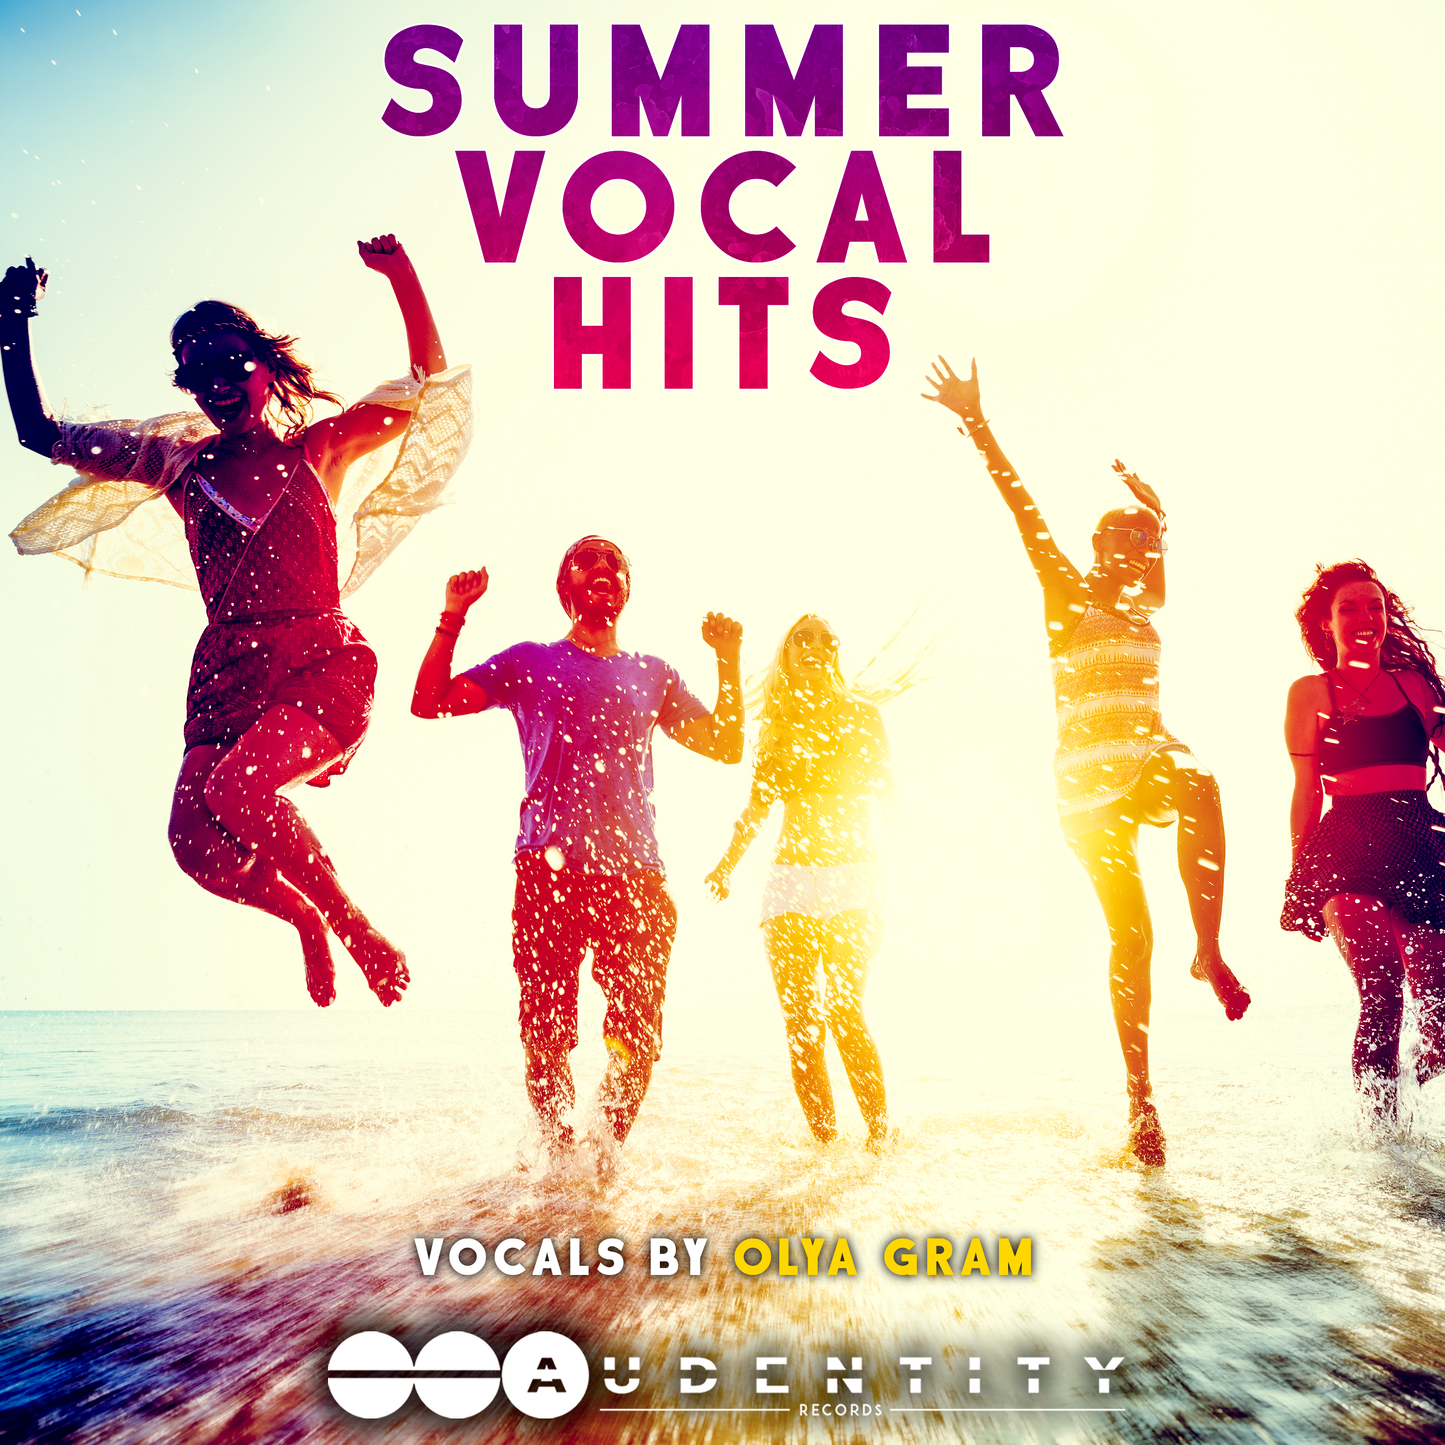 Summer Vocal Hits - vocal sample pack contains vocal samples